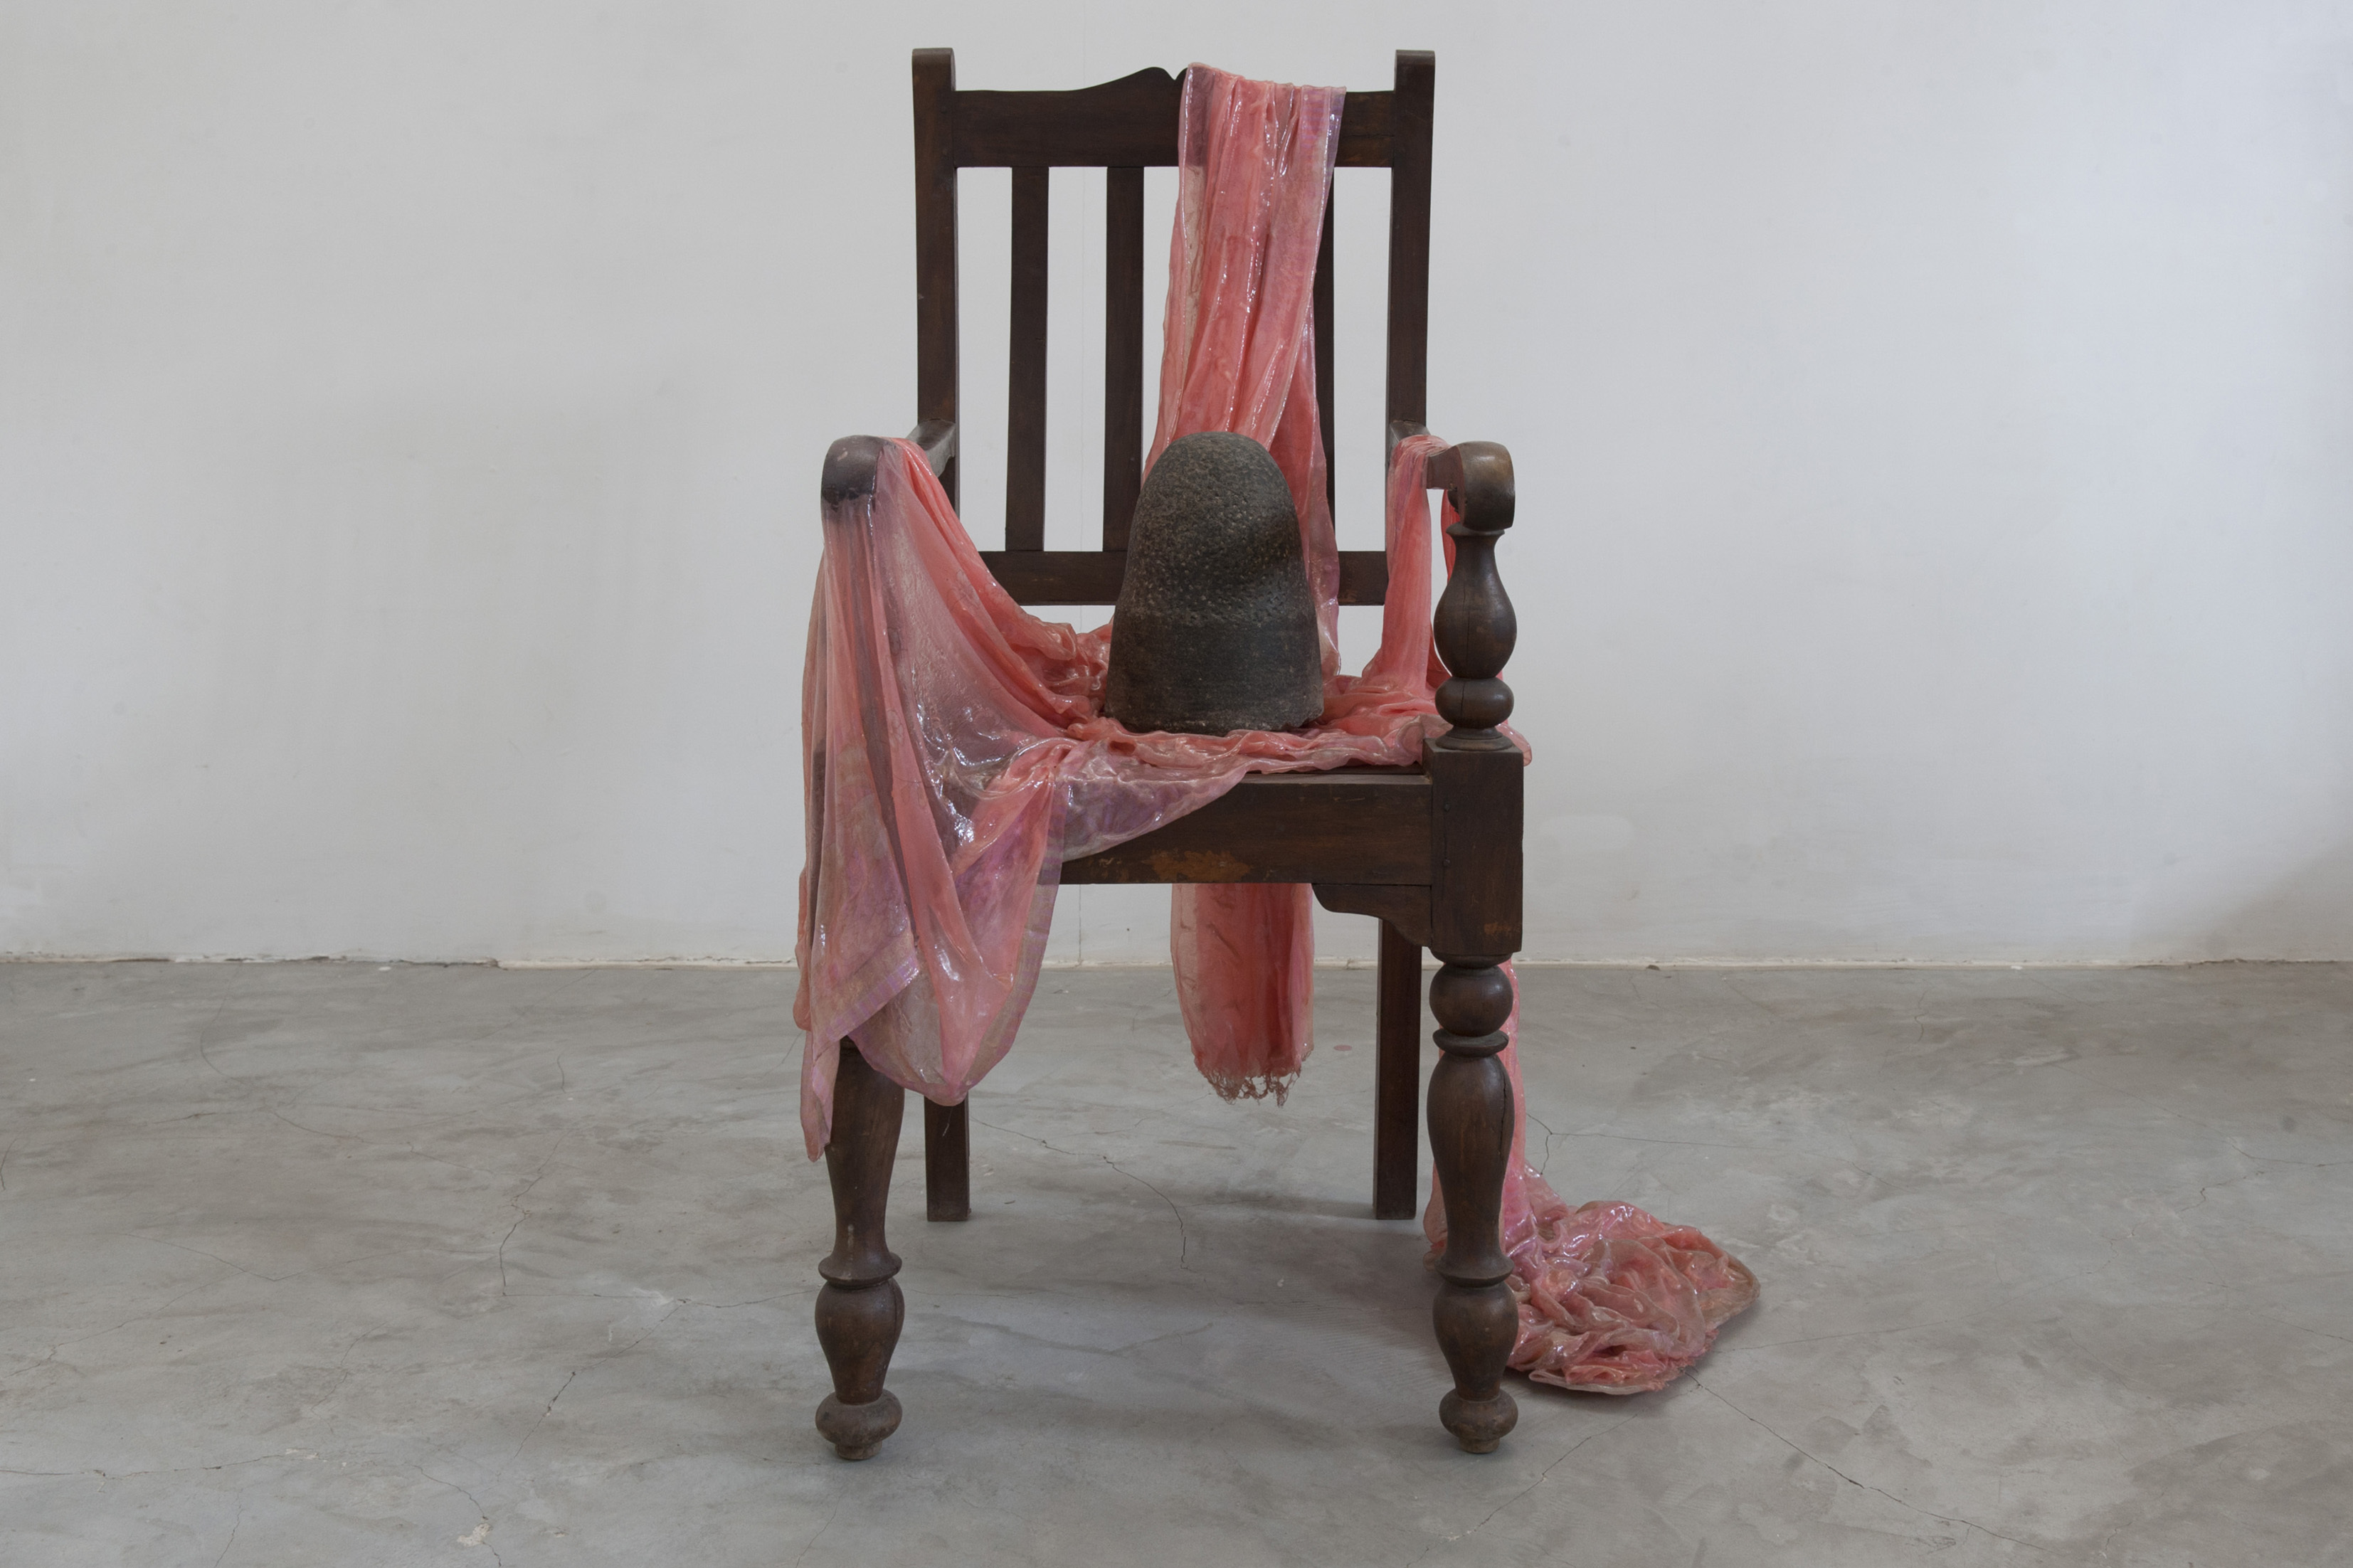 A chair draped in a red sari.